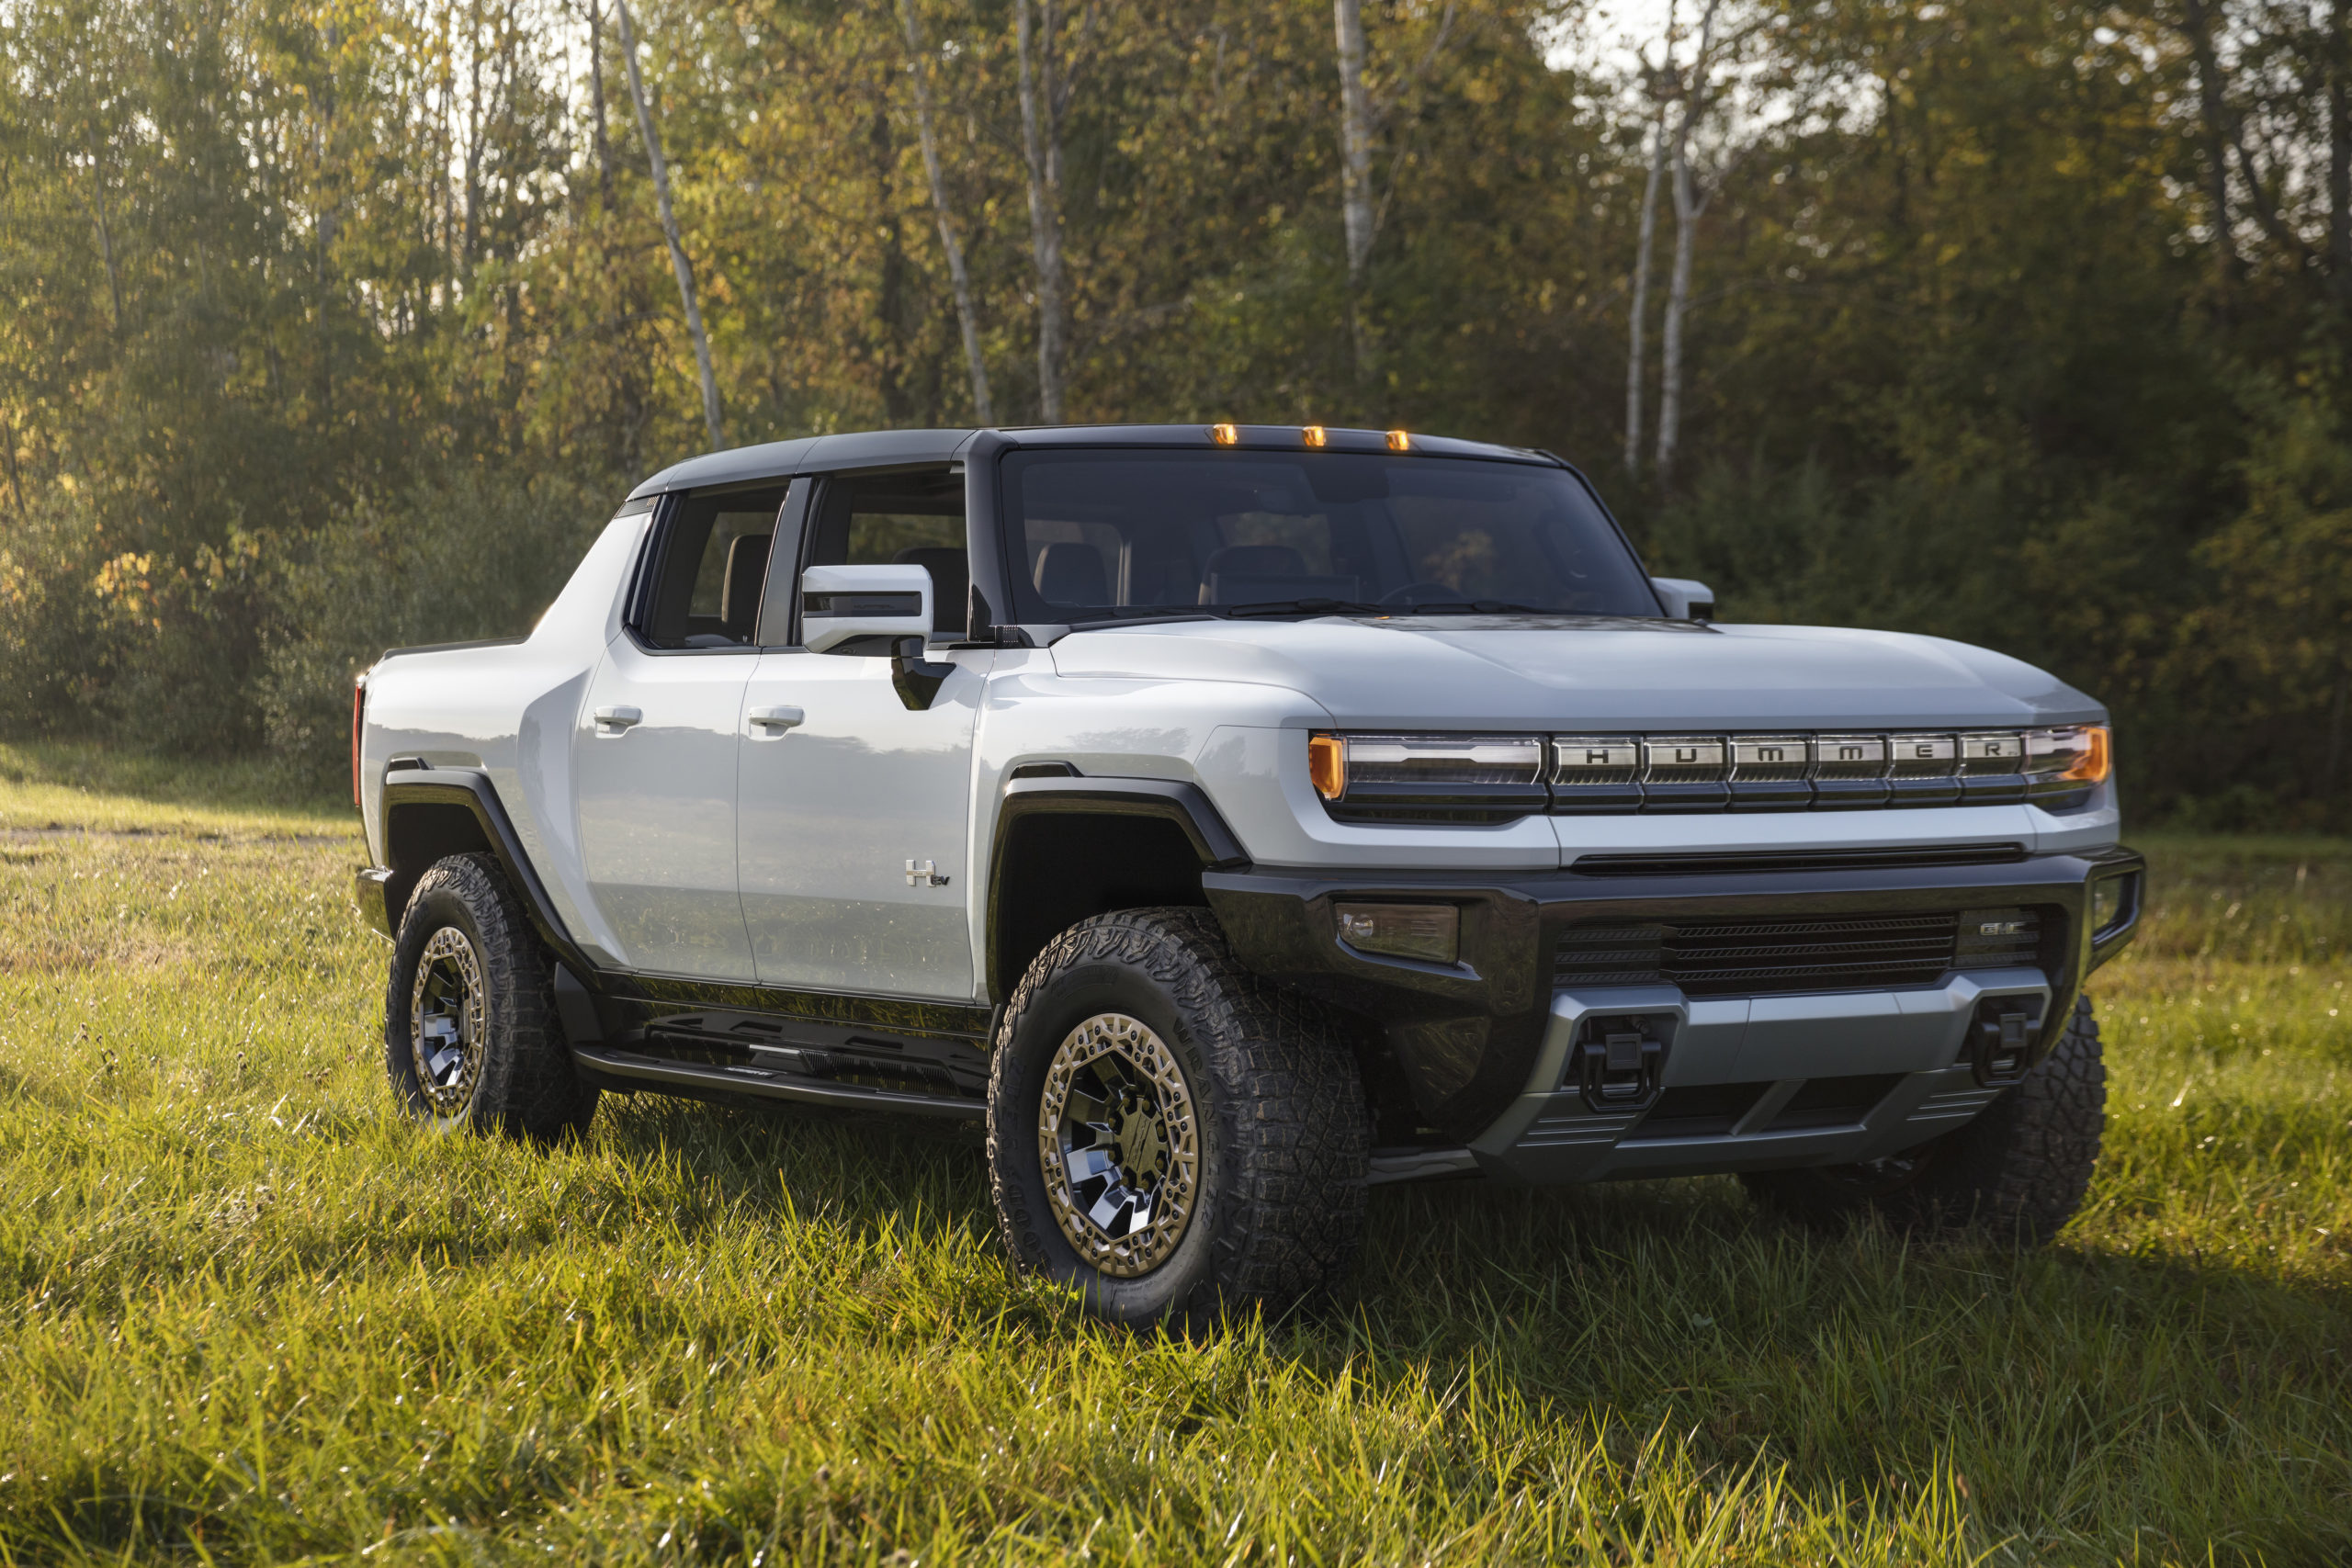 GM presents fully-electric ‘revolutionary’ Hummer